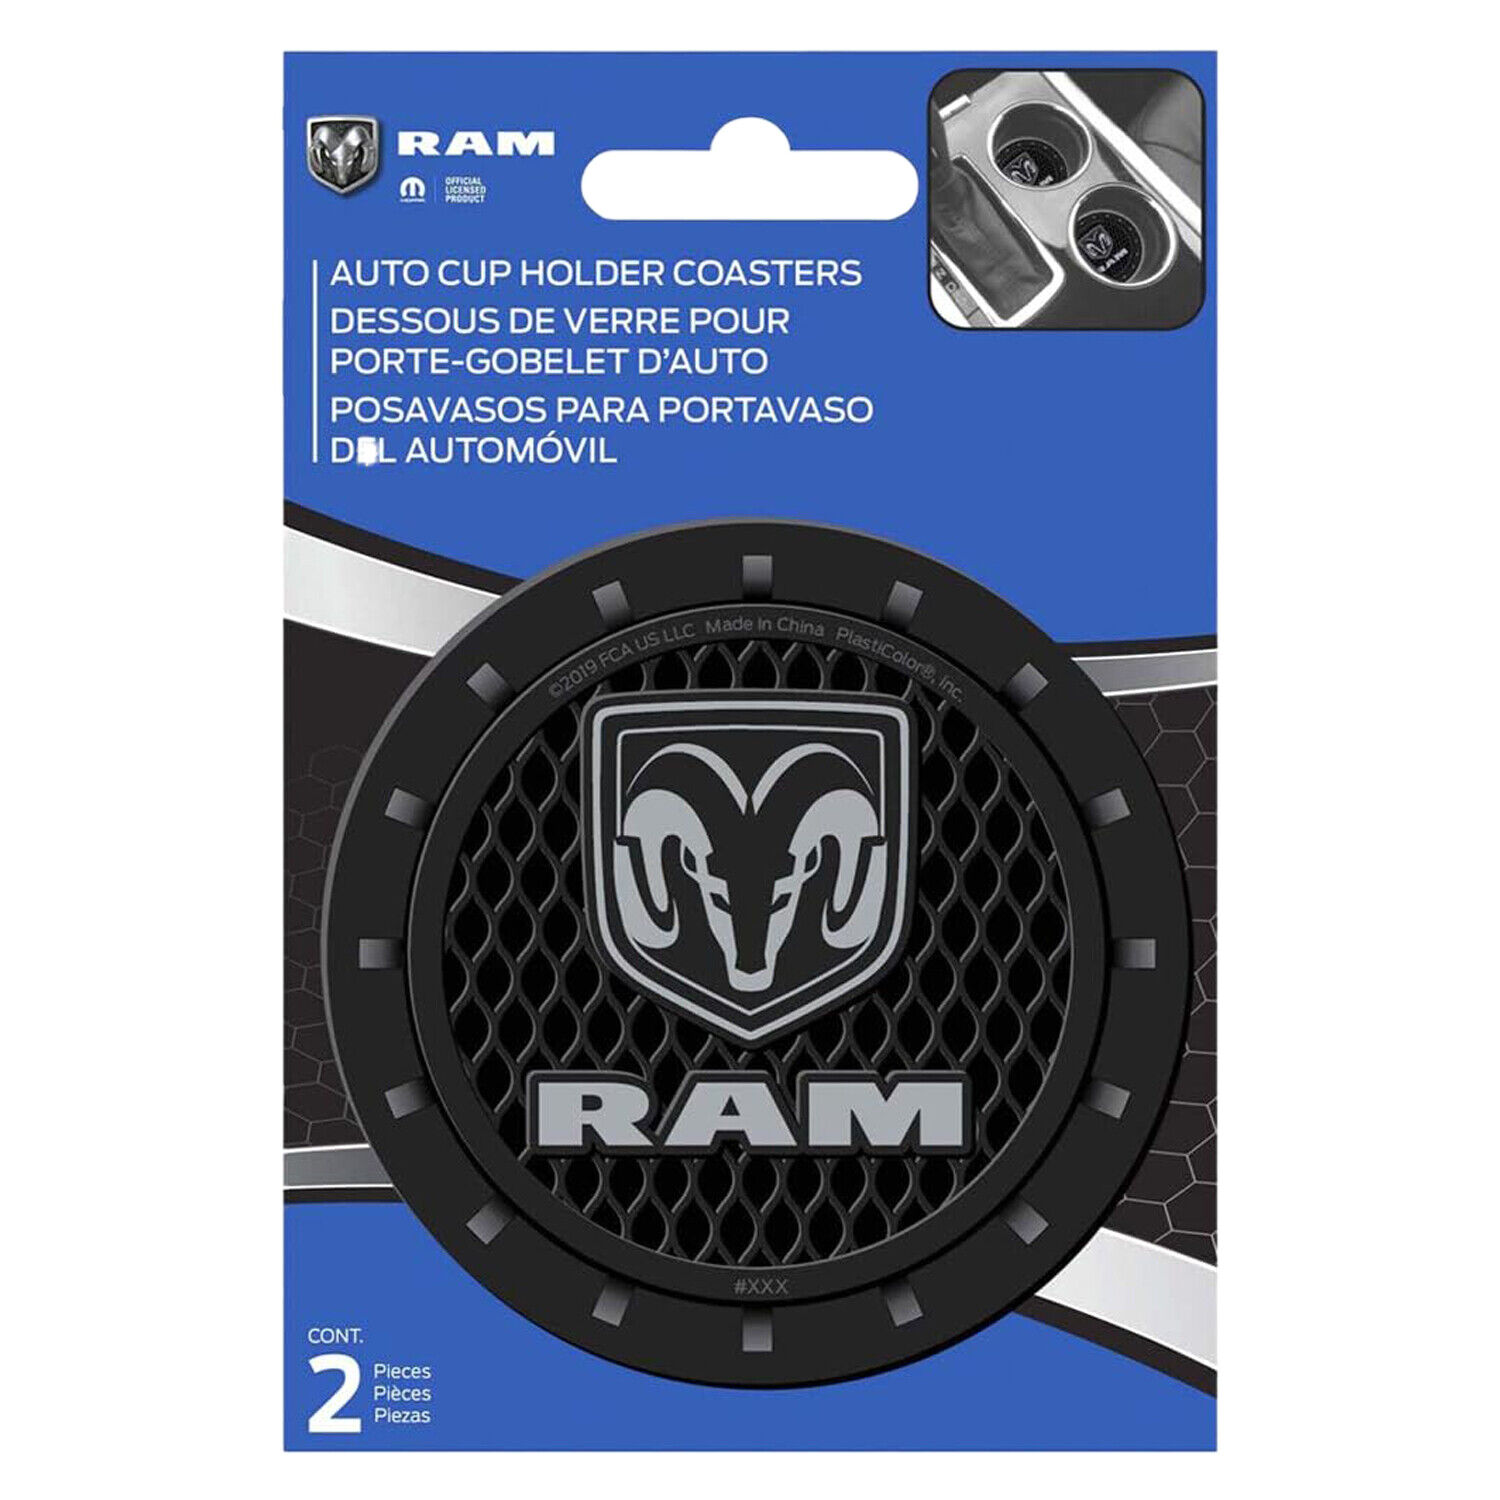 RAM Car Cup Coasters 2-Piece - Cute Coasters for Your Car Cup Holders